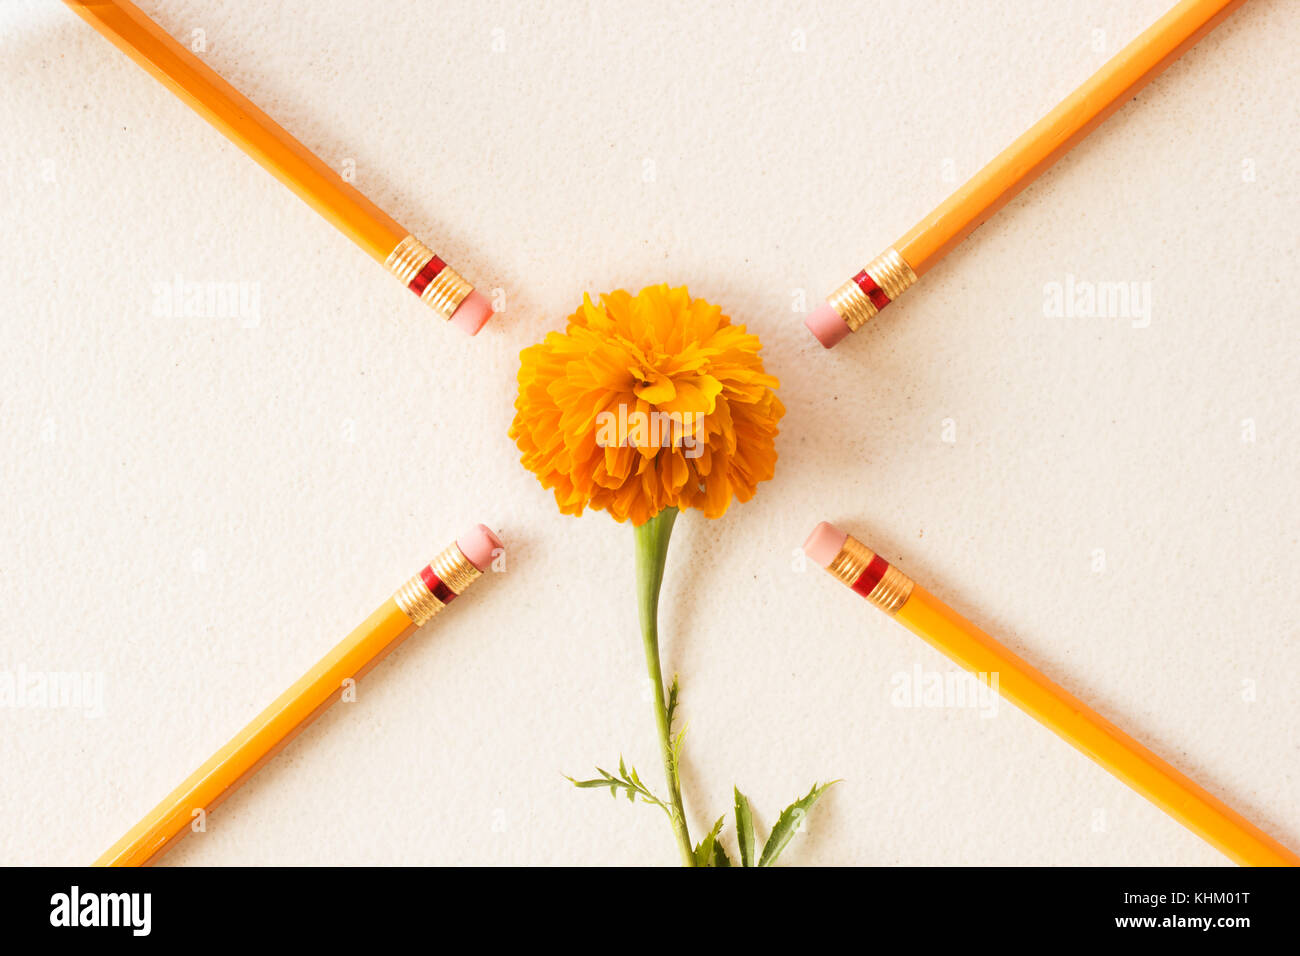 yellow flower surrounded by wood orange pencils on white paper Stock Photo